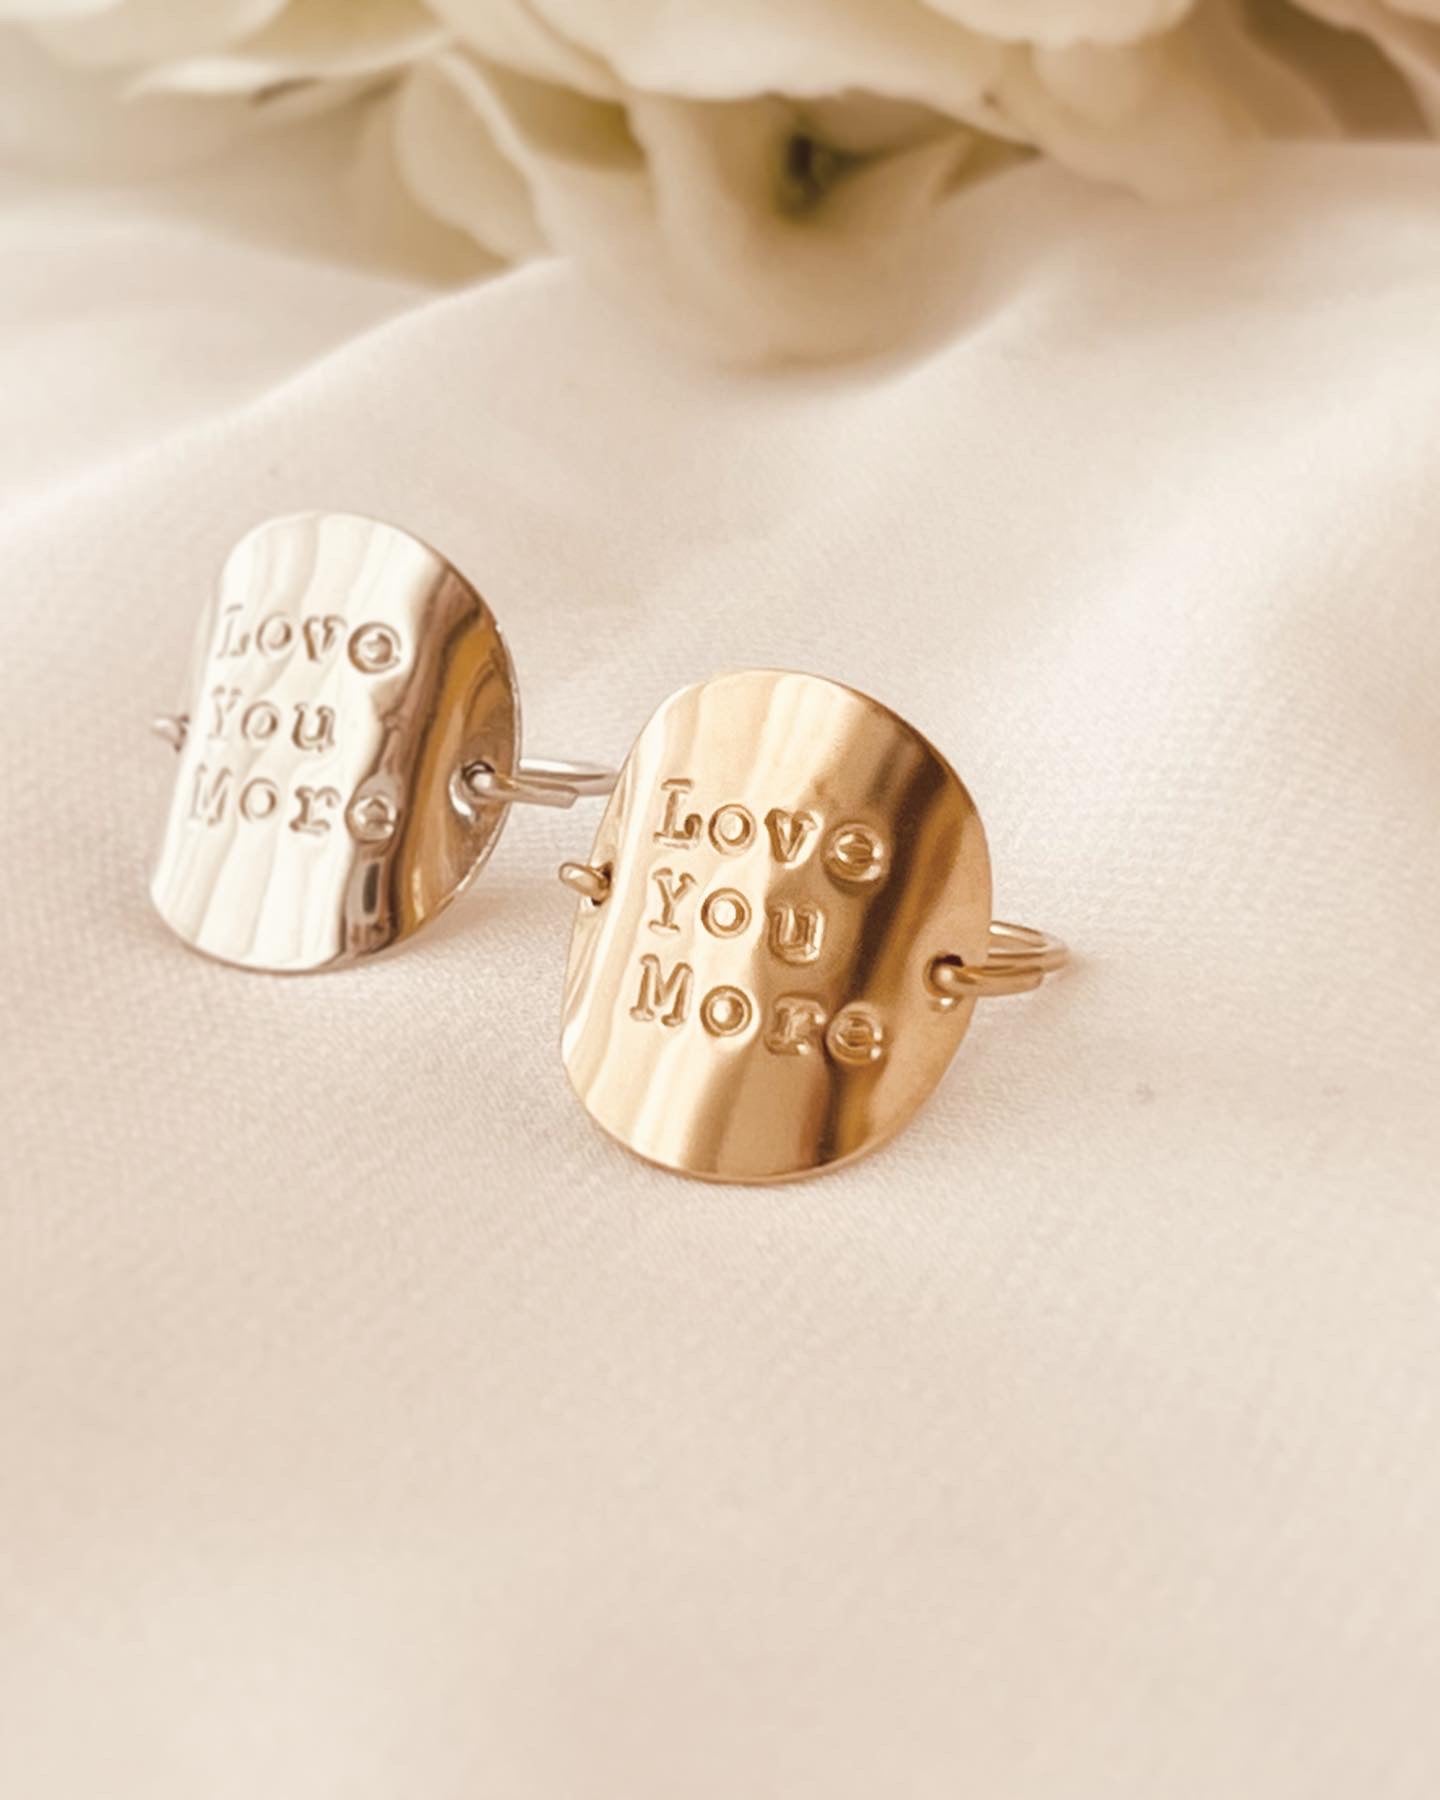 Quote Rings are an effortless way to wear personalized messages around your fingertip. Delicate and stackable, these 14k gold-filled and sterling silver rings can be custom-engraved with your favorite quotes, statements, and names. Express yourself with a unique and meaningful jewelry piece that lasts for years.